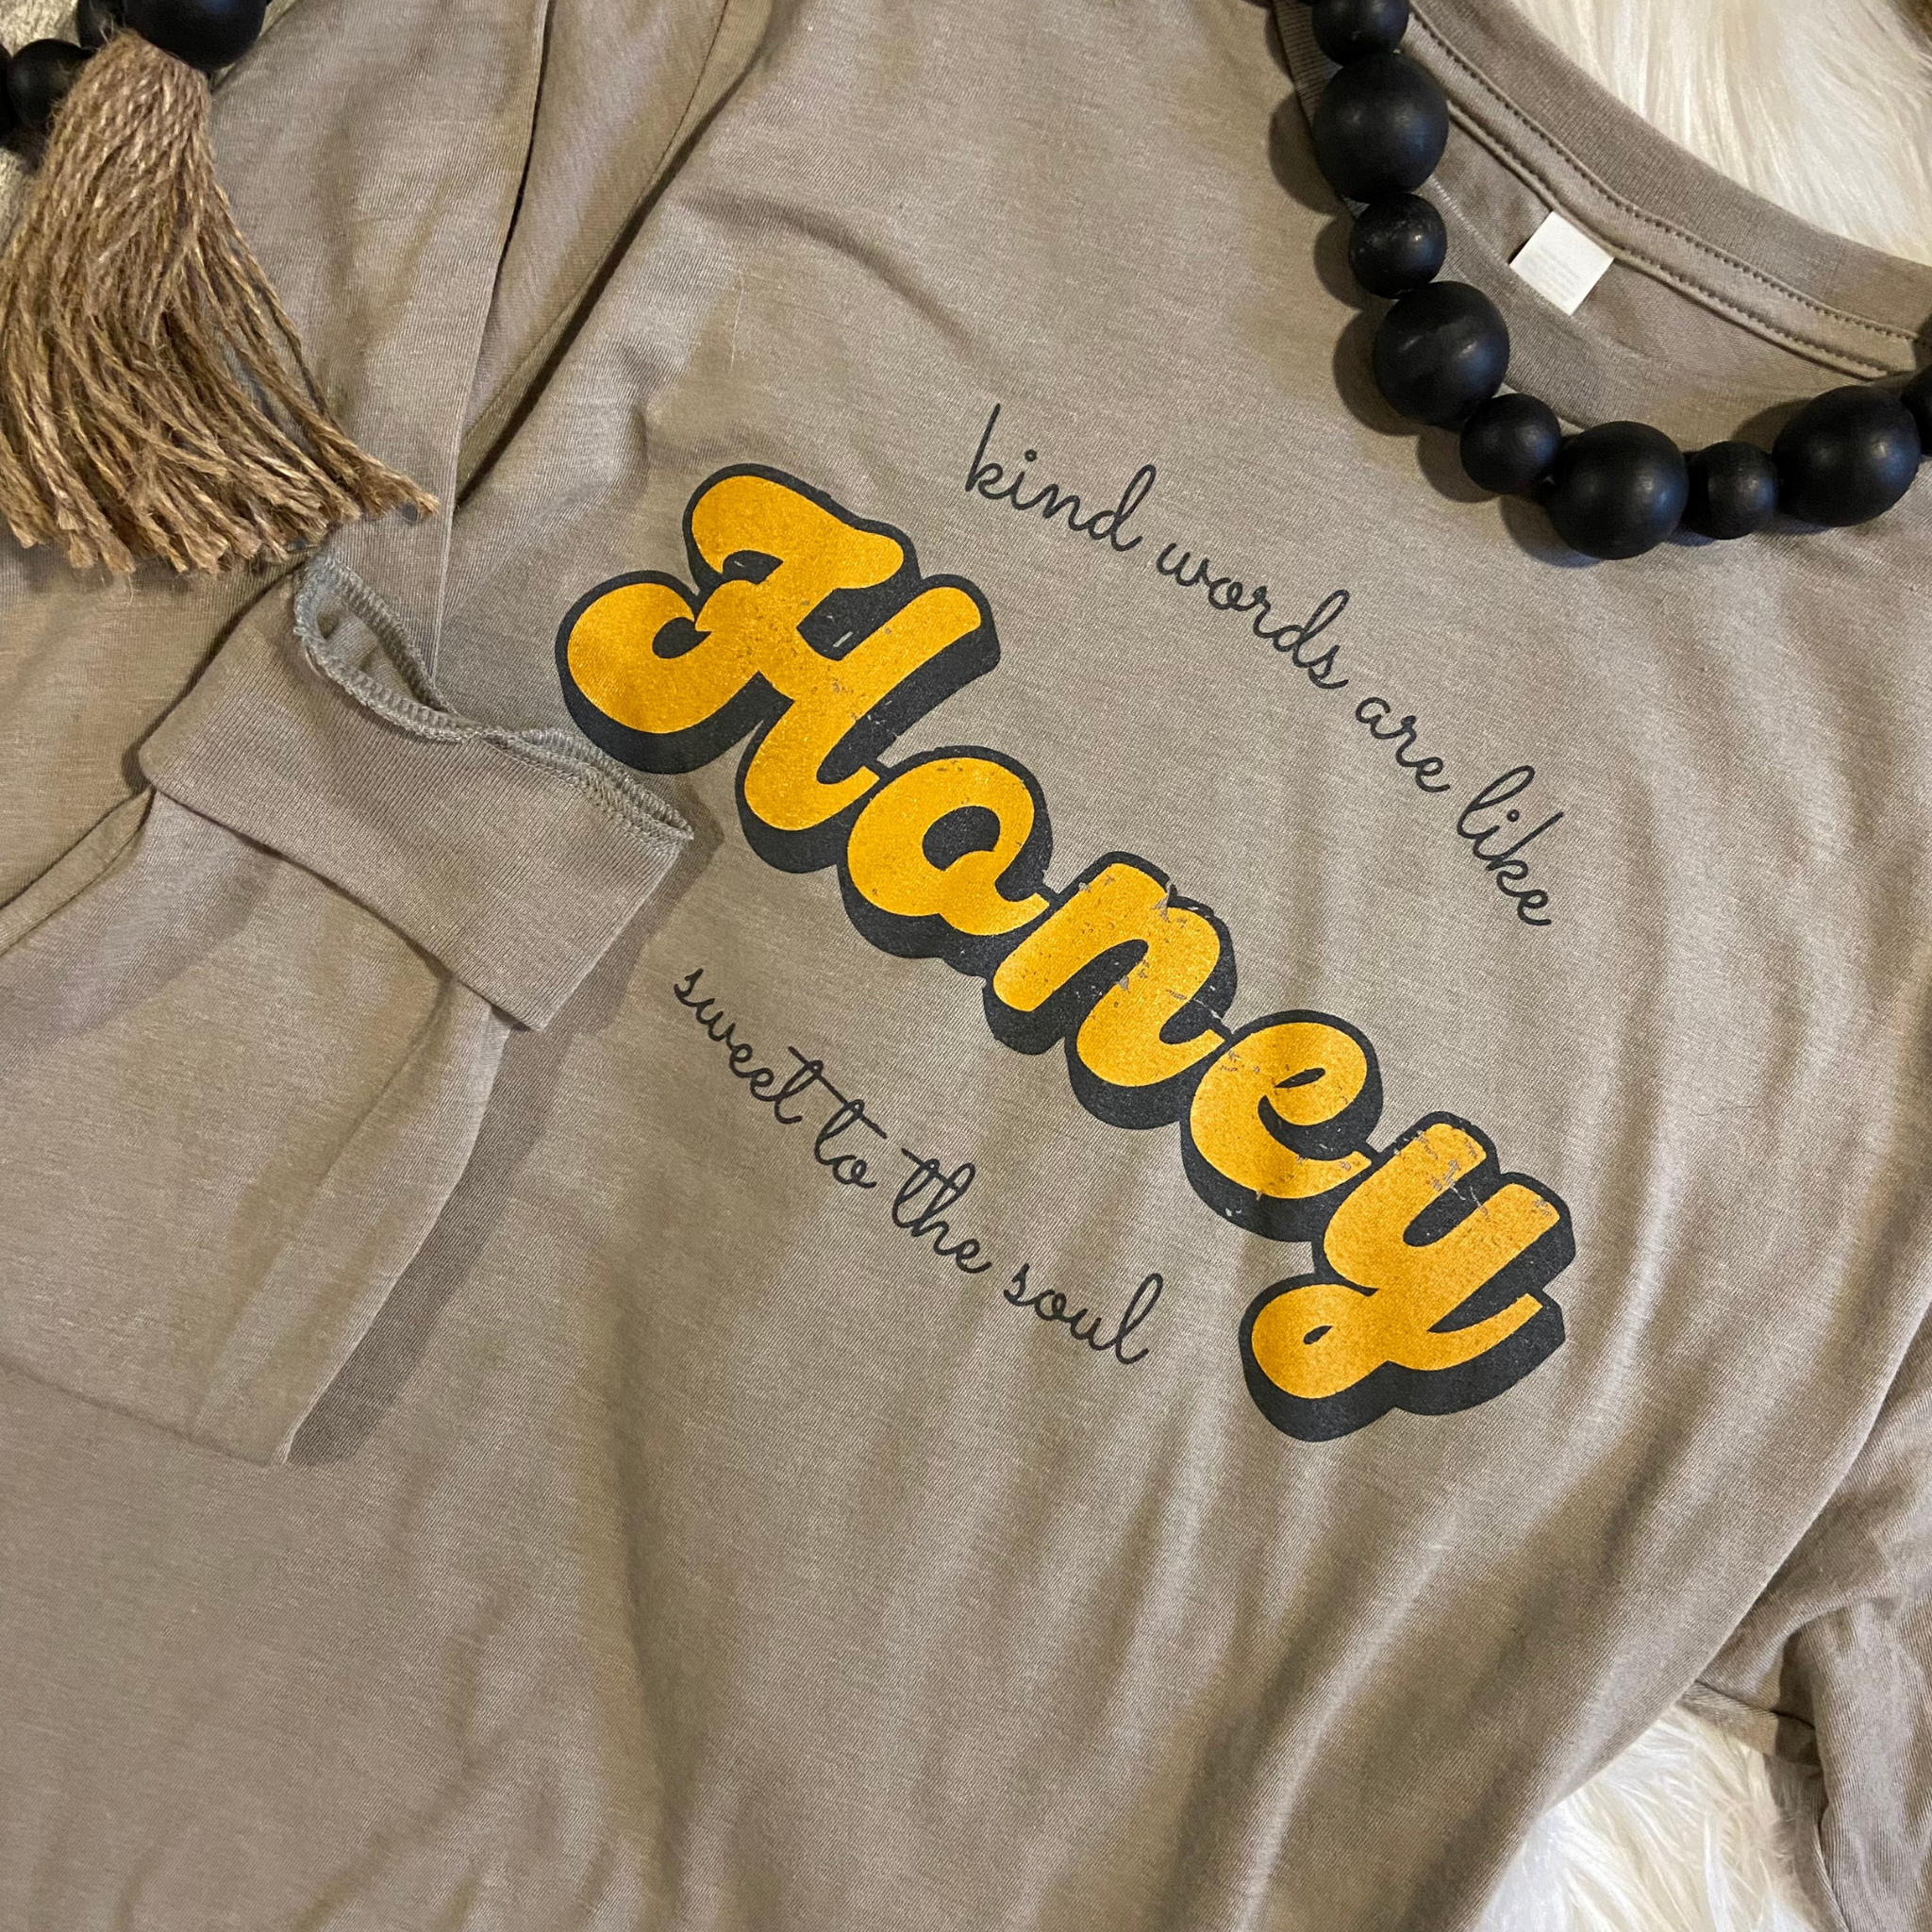 Kind words are like honey, sweet to the soul screen printed on a tan long sleeve shirt